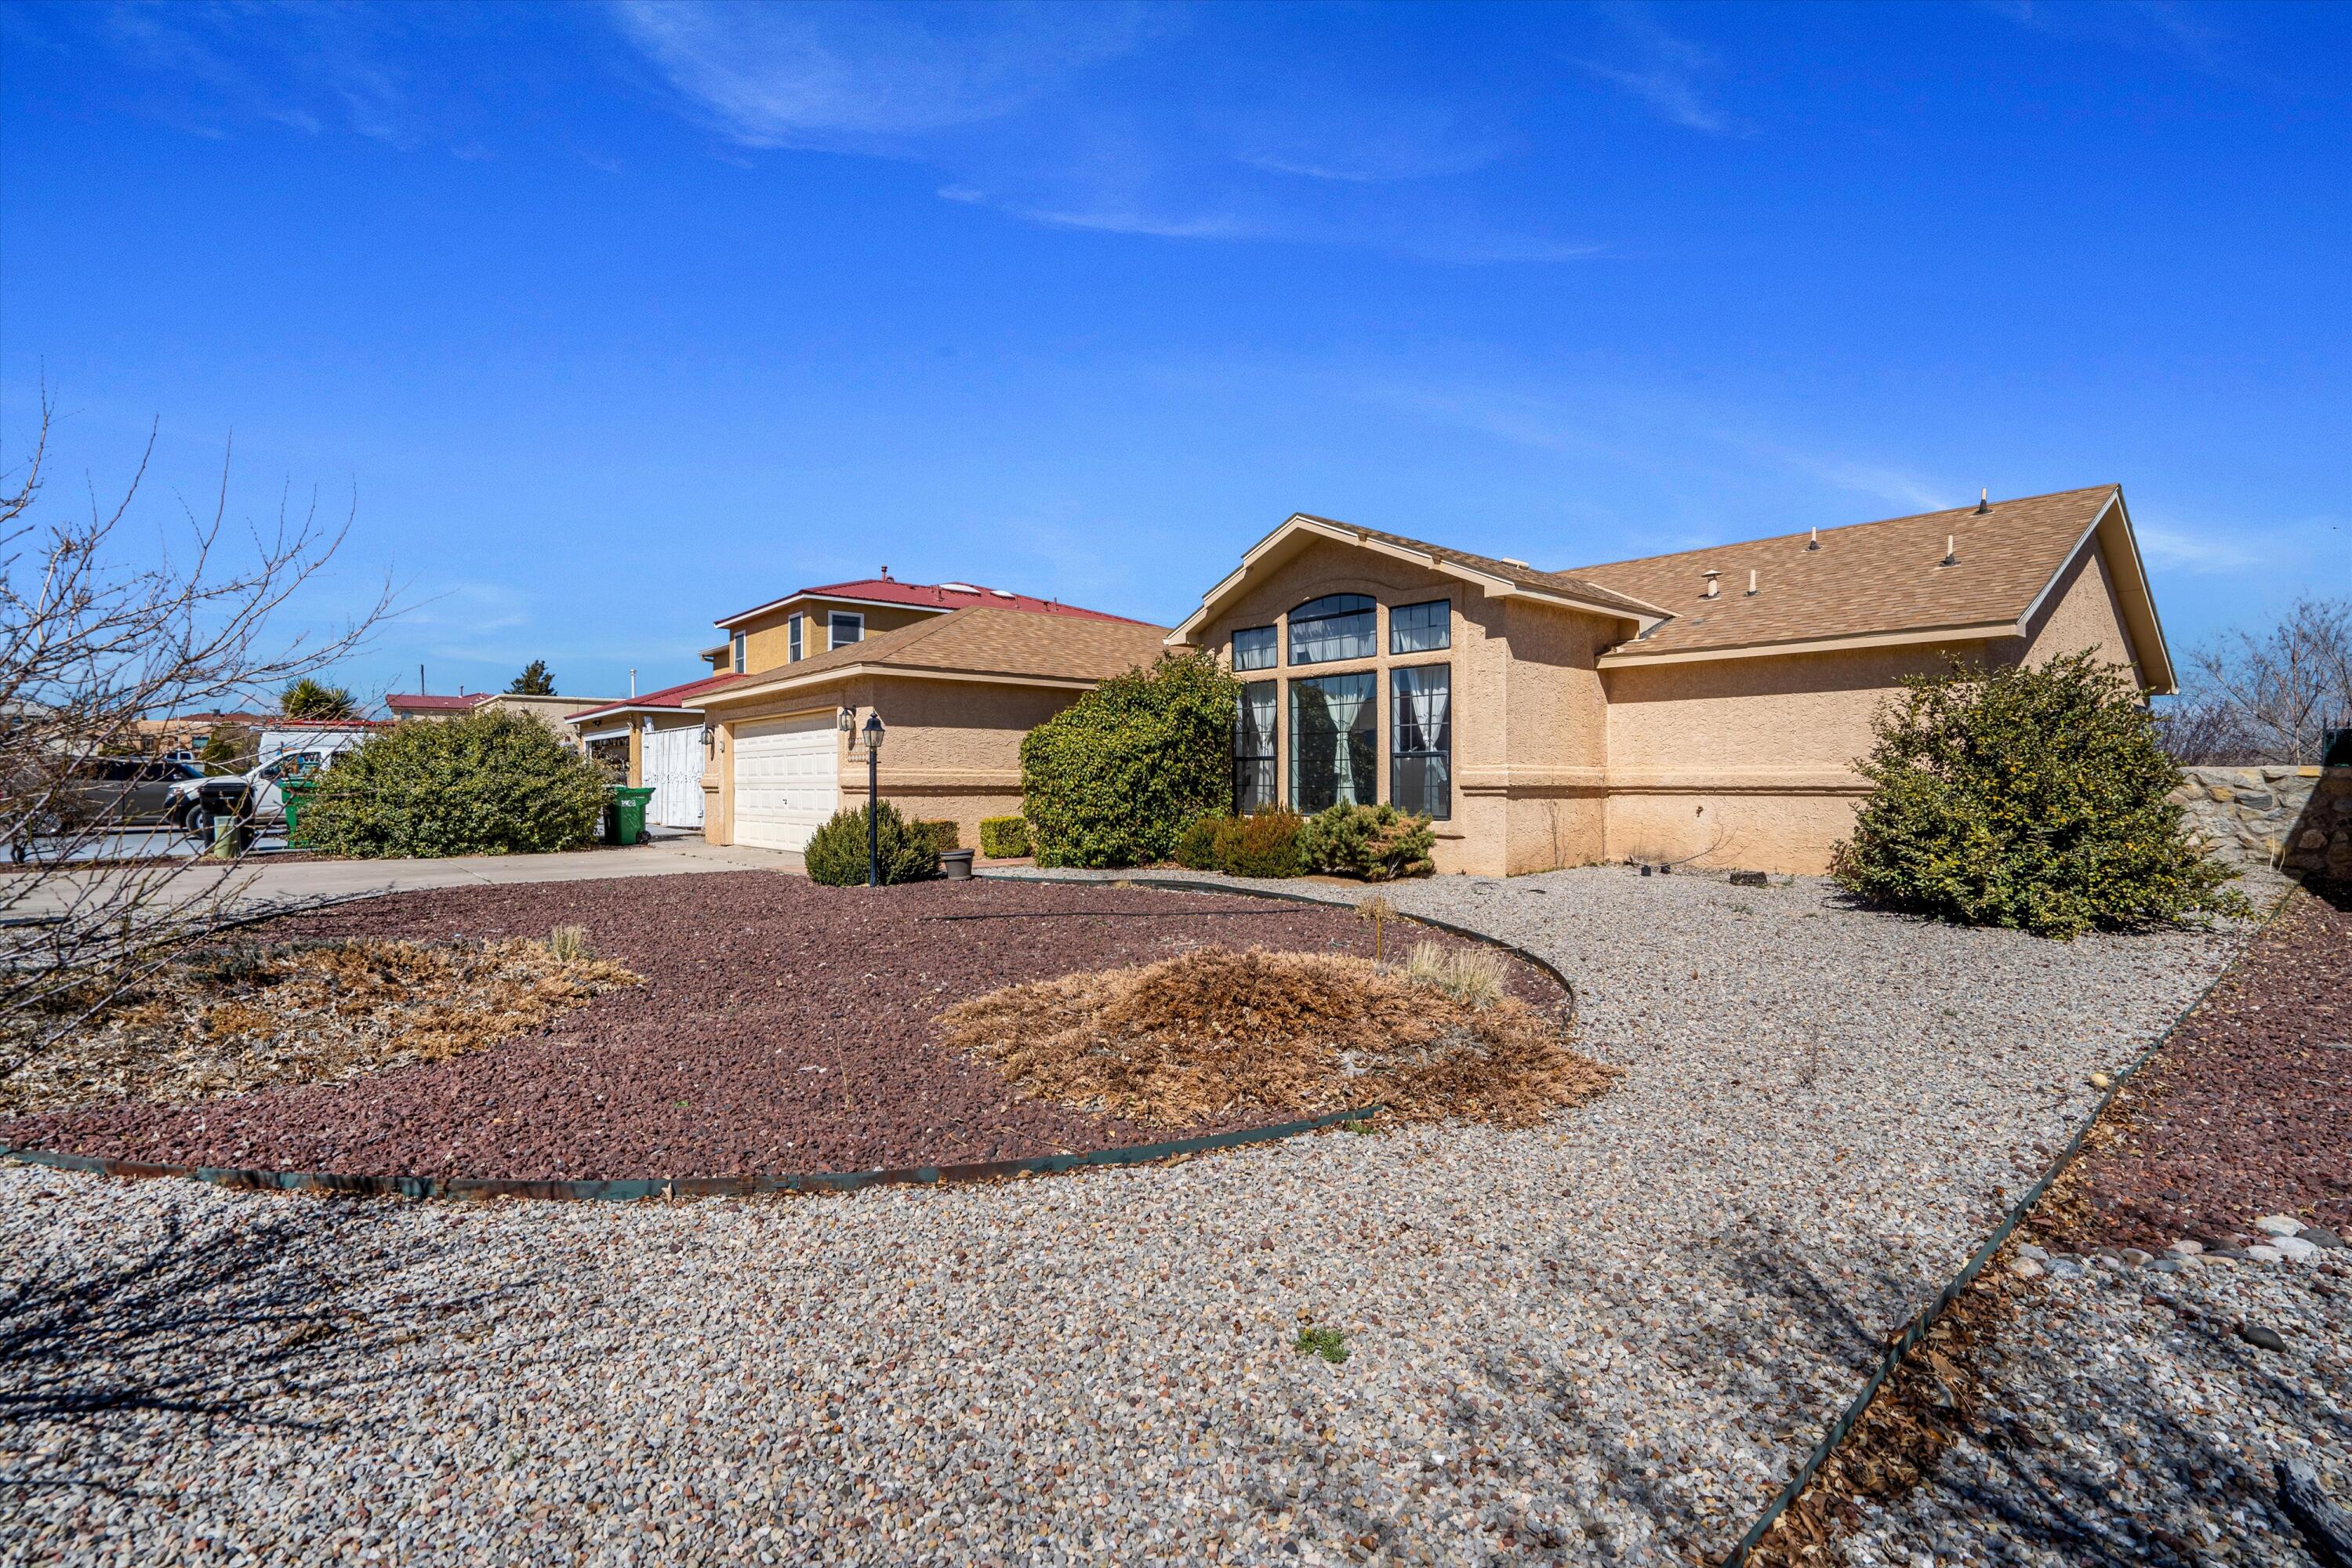 Fantastic Opportunity in Rio Rancho! Don't miss out on this inviting 2-bedroom, 2-bathroom home nestled on a .20-acre lot, boasting a prime location and move-in readiness. Featuring a generous kitchen with granite countertops, a cozy breakfast nook, and a separate dining area, this home is perfect for gatherings and everyday living. Stay comfortable year-round with refrigerated air, and take advantage of the oversized garage, offering space for a potential workshop. Relax on the covered patio and soak in the stunning mountain views. Benefit from the convenience of being close to top-rated schools, restaurants, breweries, shopping centers, parks, and trails. This property offers the ideal blend of comfort, convenience, and charm - schedule a viewing today!